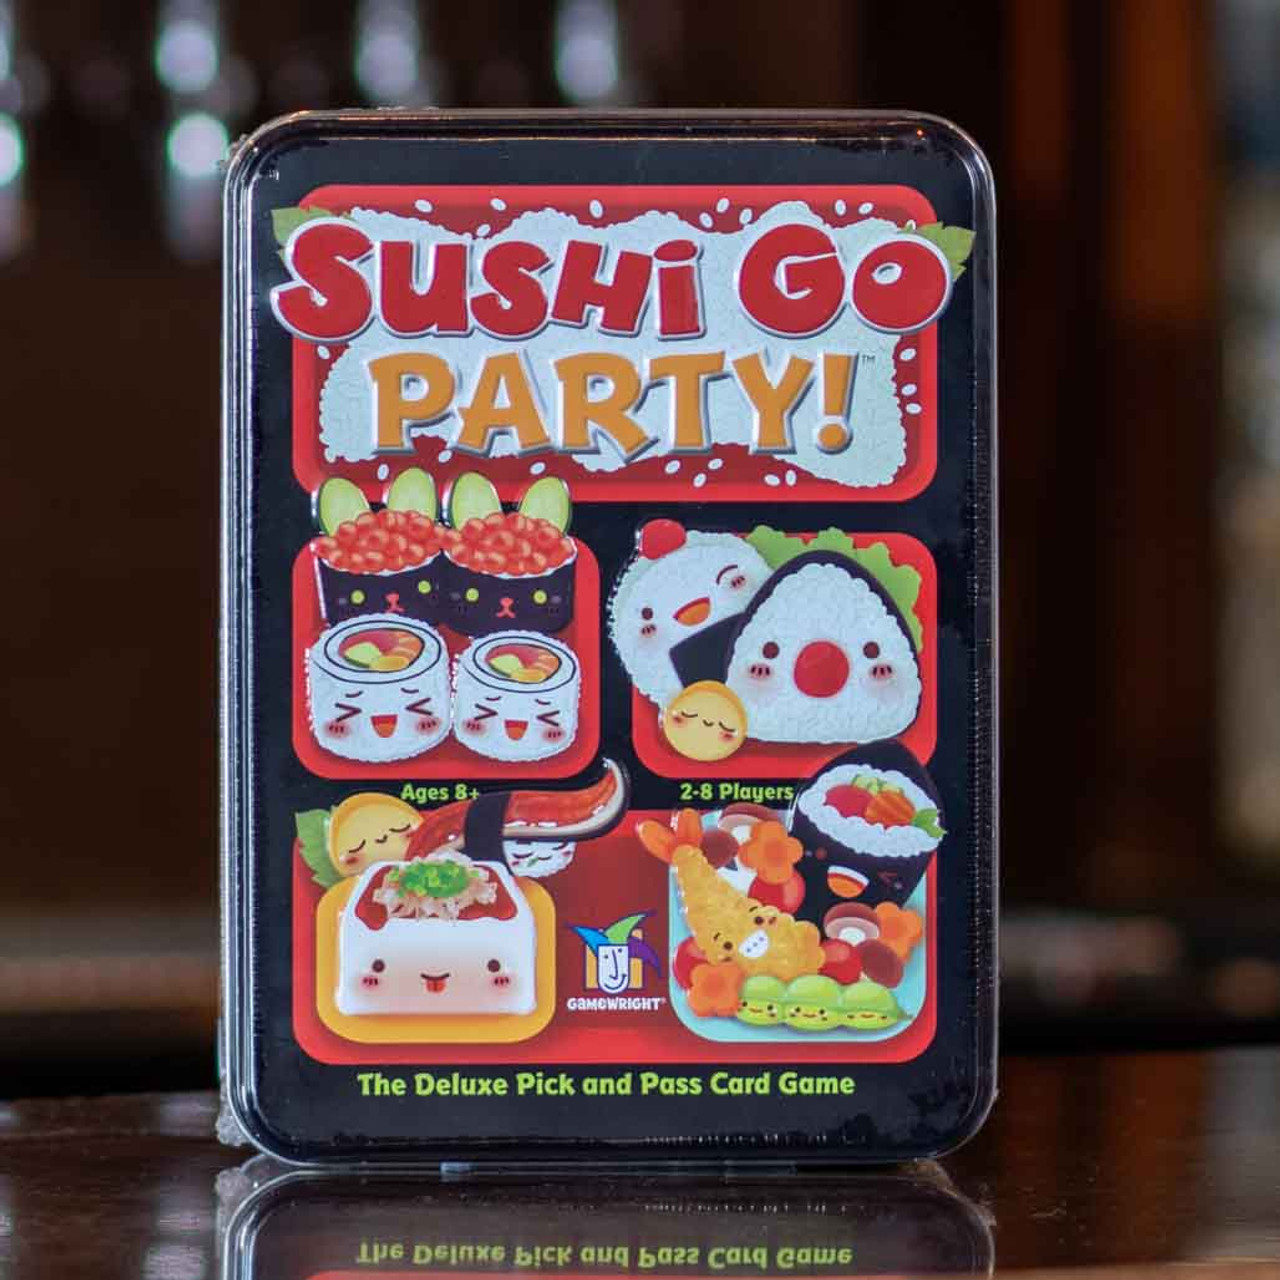 A picture of the board game Sushi Go Party. The cover is emblazoned with illustrations of cartoon sushi.